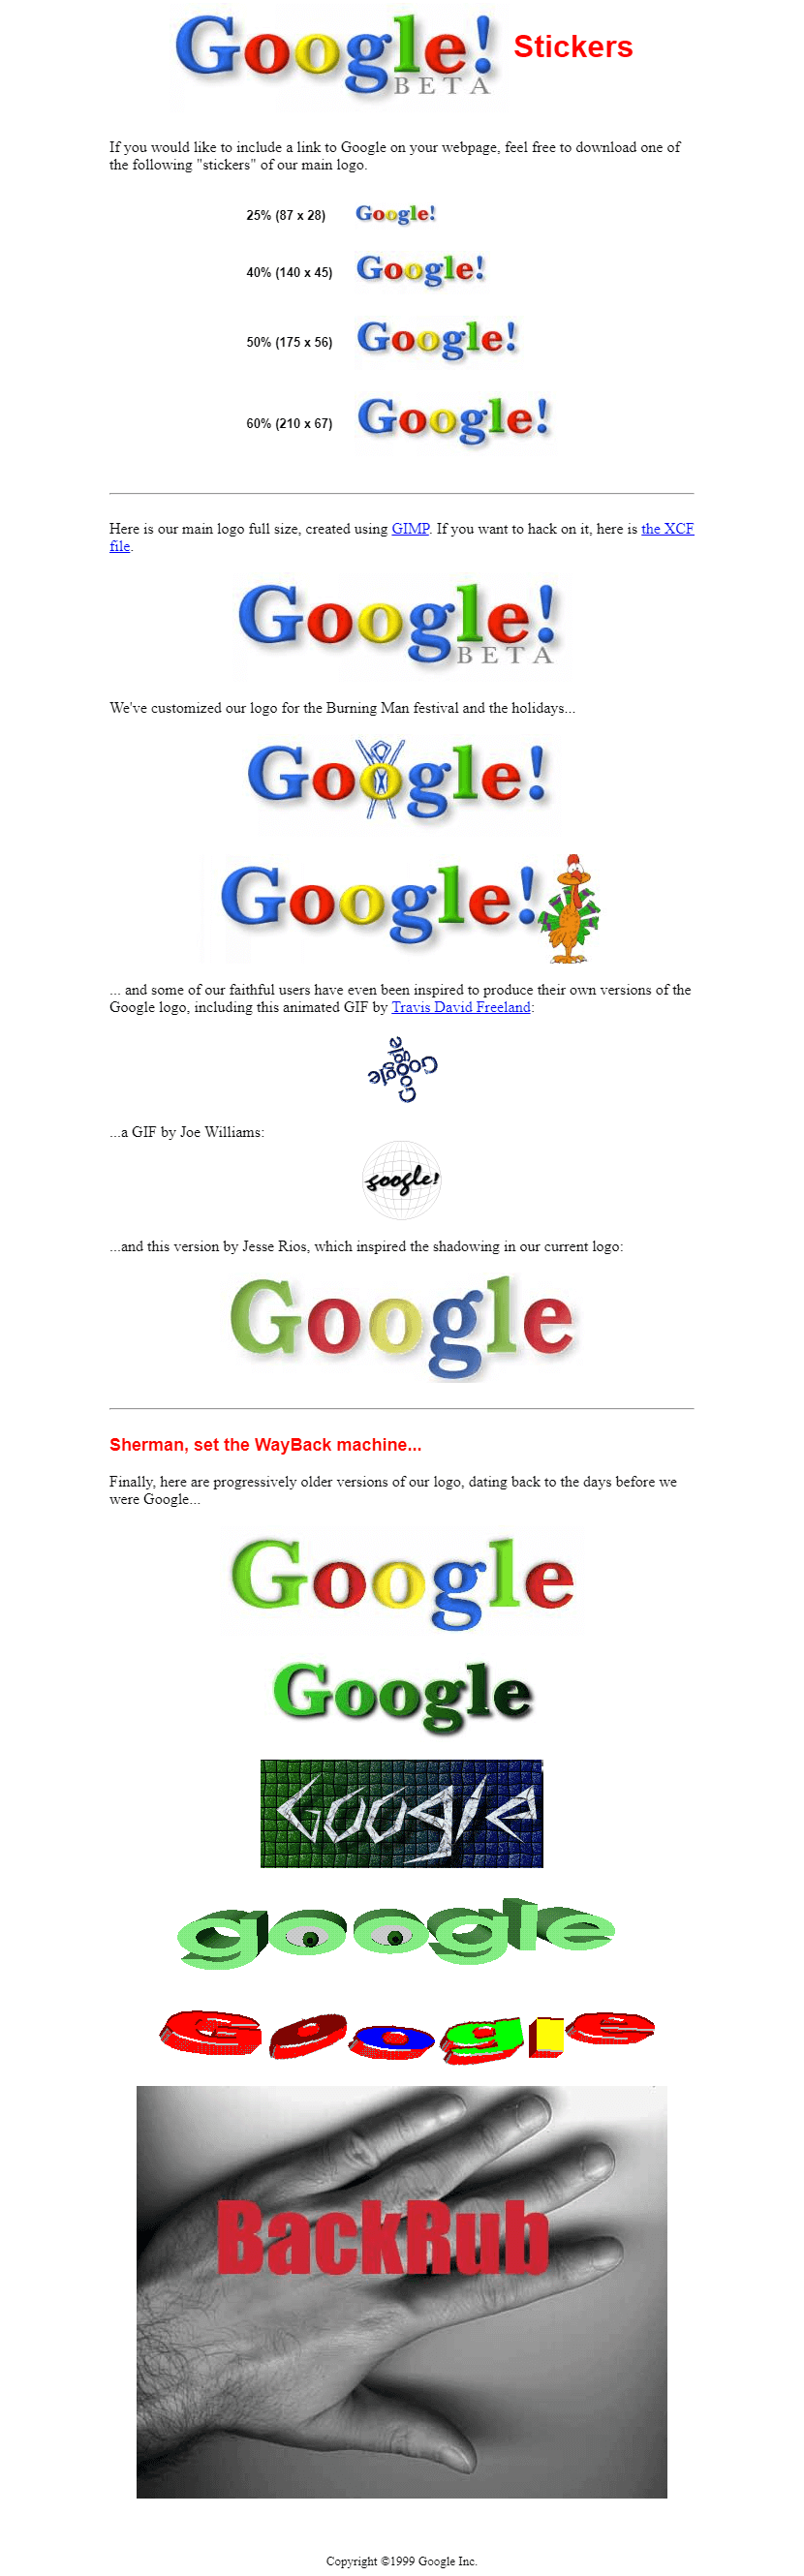 Google logos and stickers in 1999